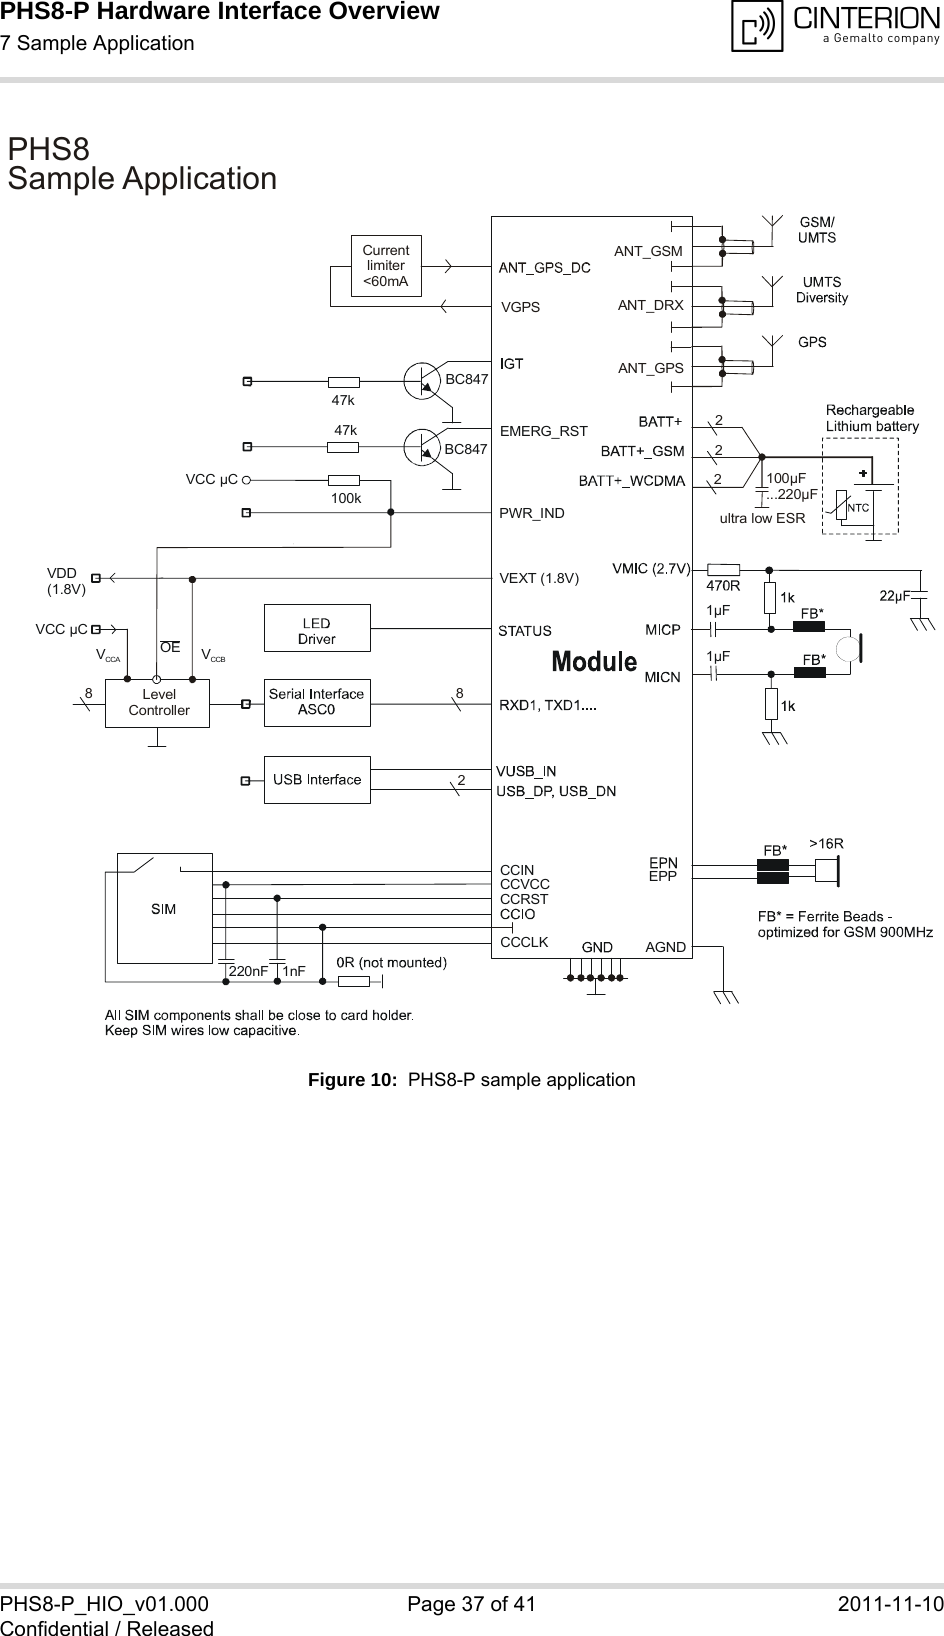 PHS8-P Hardware Interface Overview7 Sample Application37PHS8-P_HIO_v01.000 Page 37 of 41 2011-11-10Confidential / ReleasedFigure 10:  PHS8-P sample application47k100kVCC µC47kEMERG_RSTPWR_INDCCCLKCCRSTCCINCCVCC220nFAGNDEPPBC847BC8471nFPHS8  ApplicationSample 22228LevelController8VEXT (1.8V)1µF1µFVCCBVCCAVCC µCVDD(1.8V)100µF...220µFultra low ESRANT_DRXANT_GSMANT_GPSCurrentlimiter&lt;60mAVGPSOE